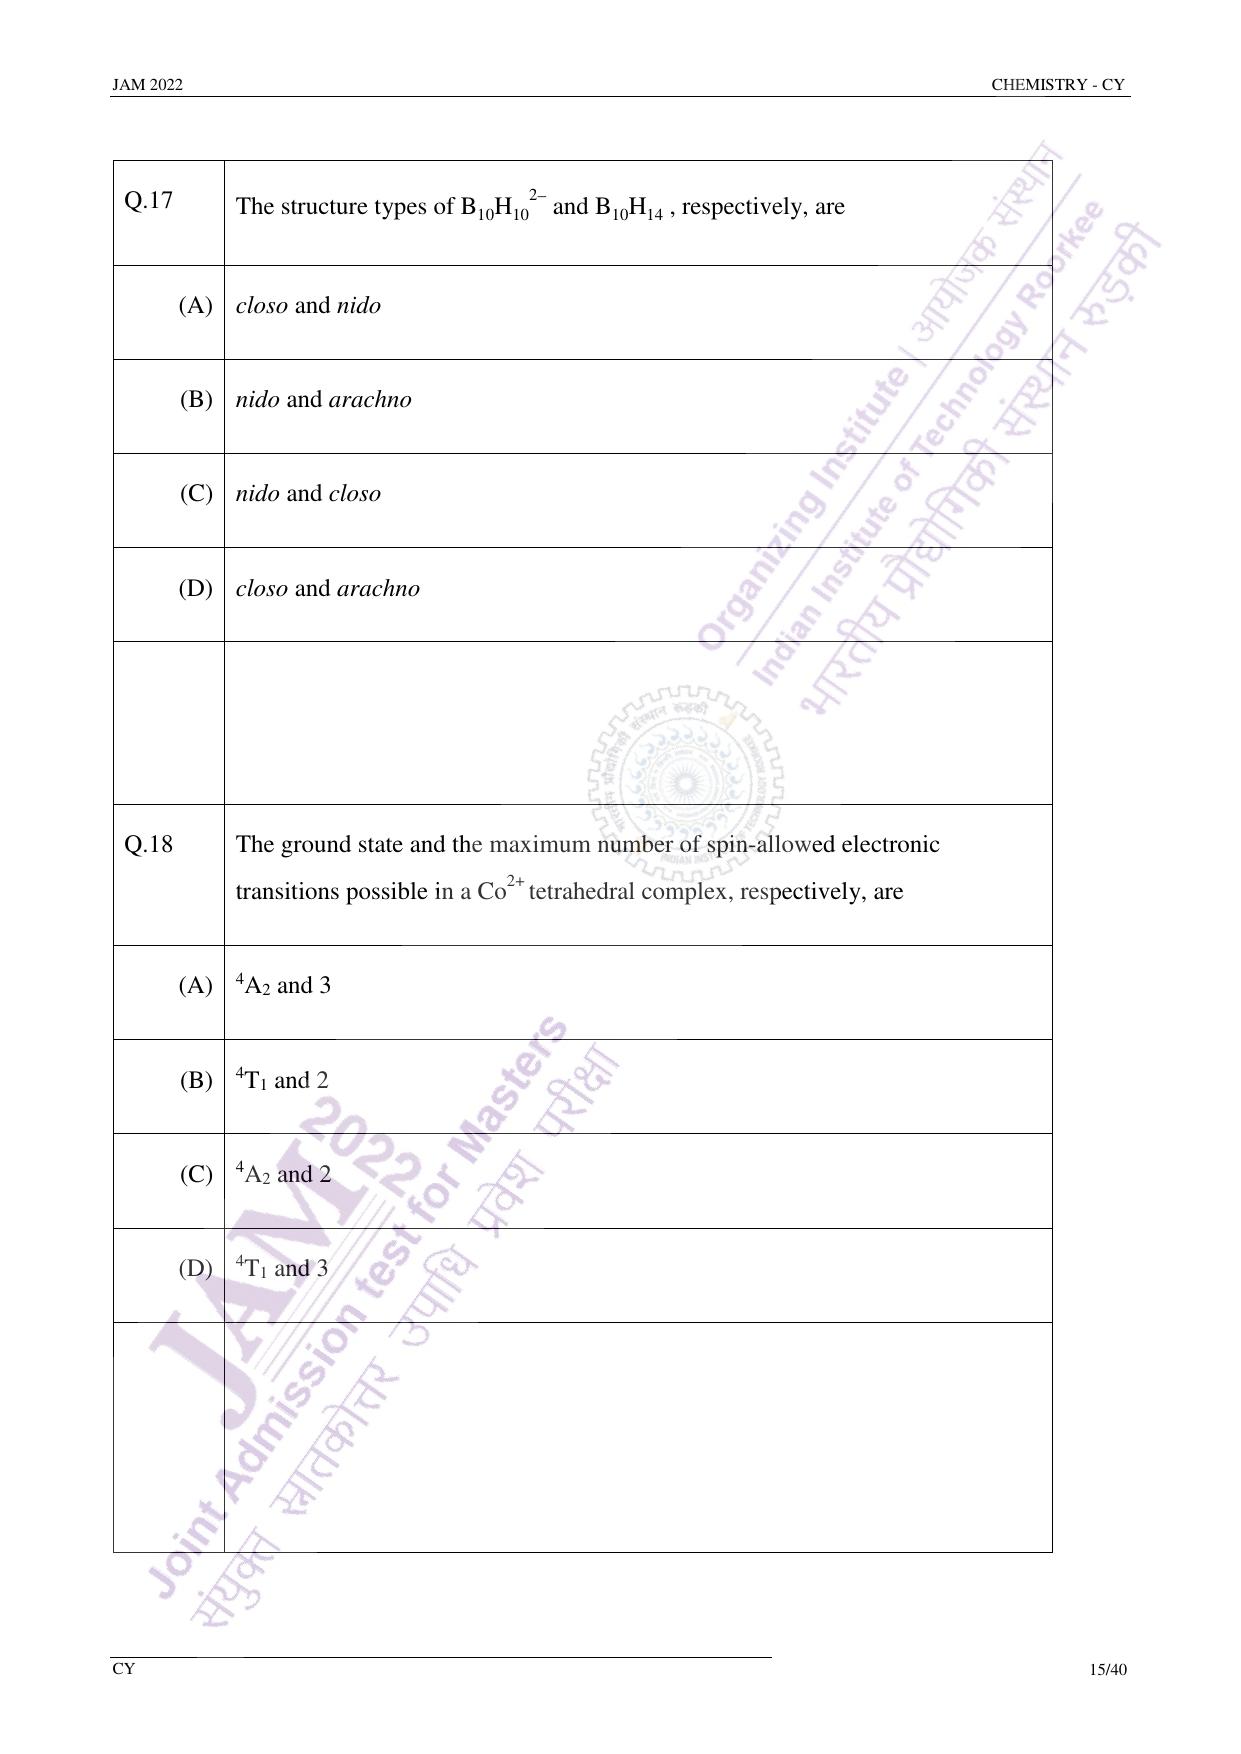 JAM 2022: CY Question Paper - Page 14